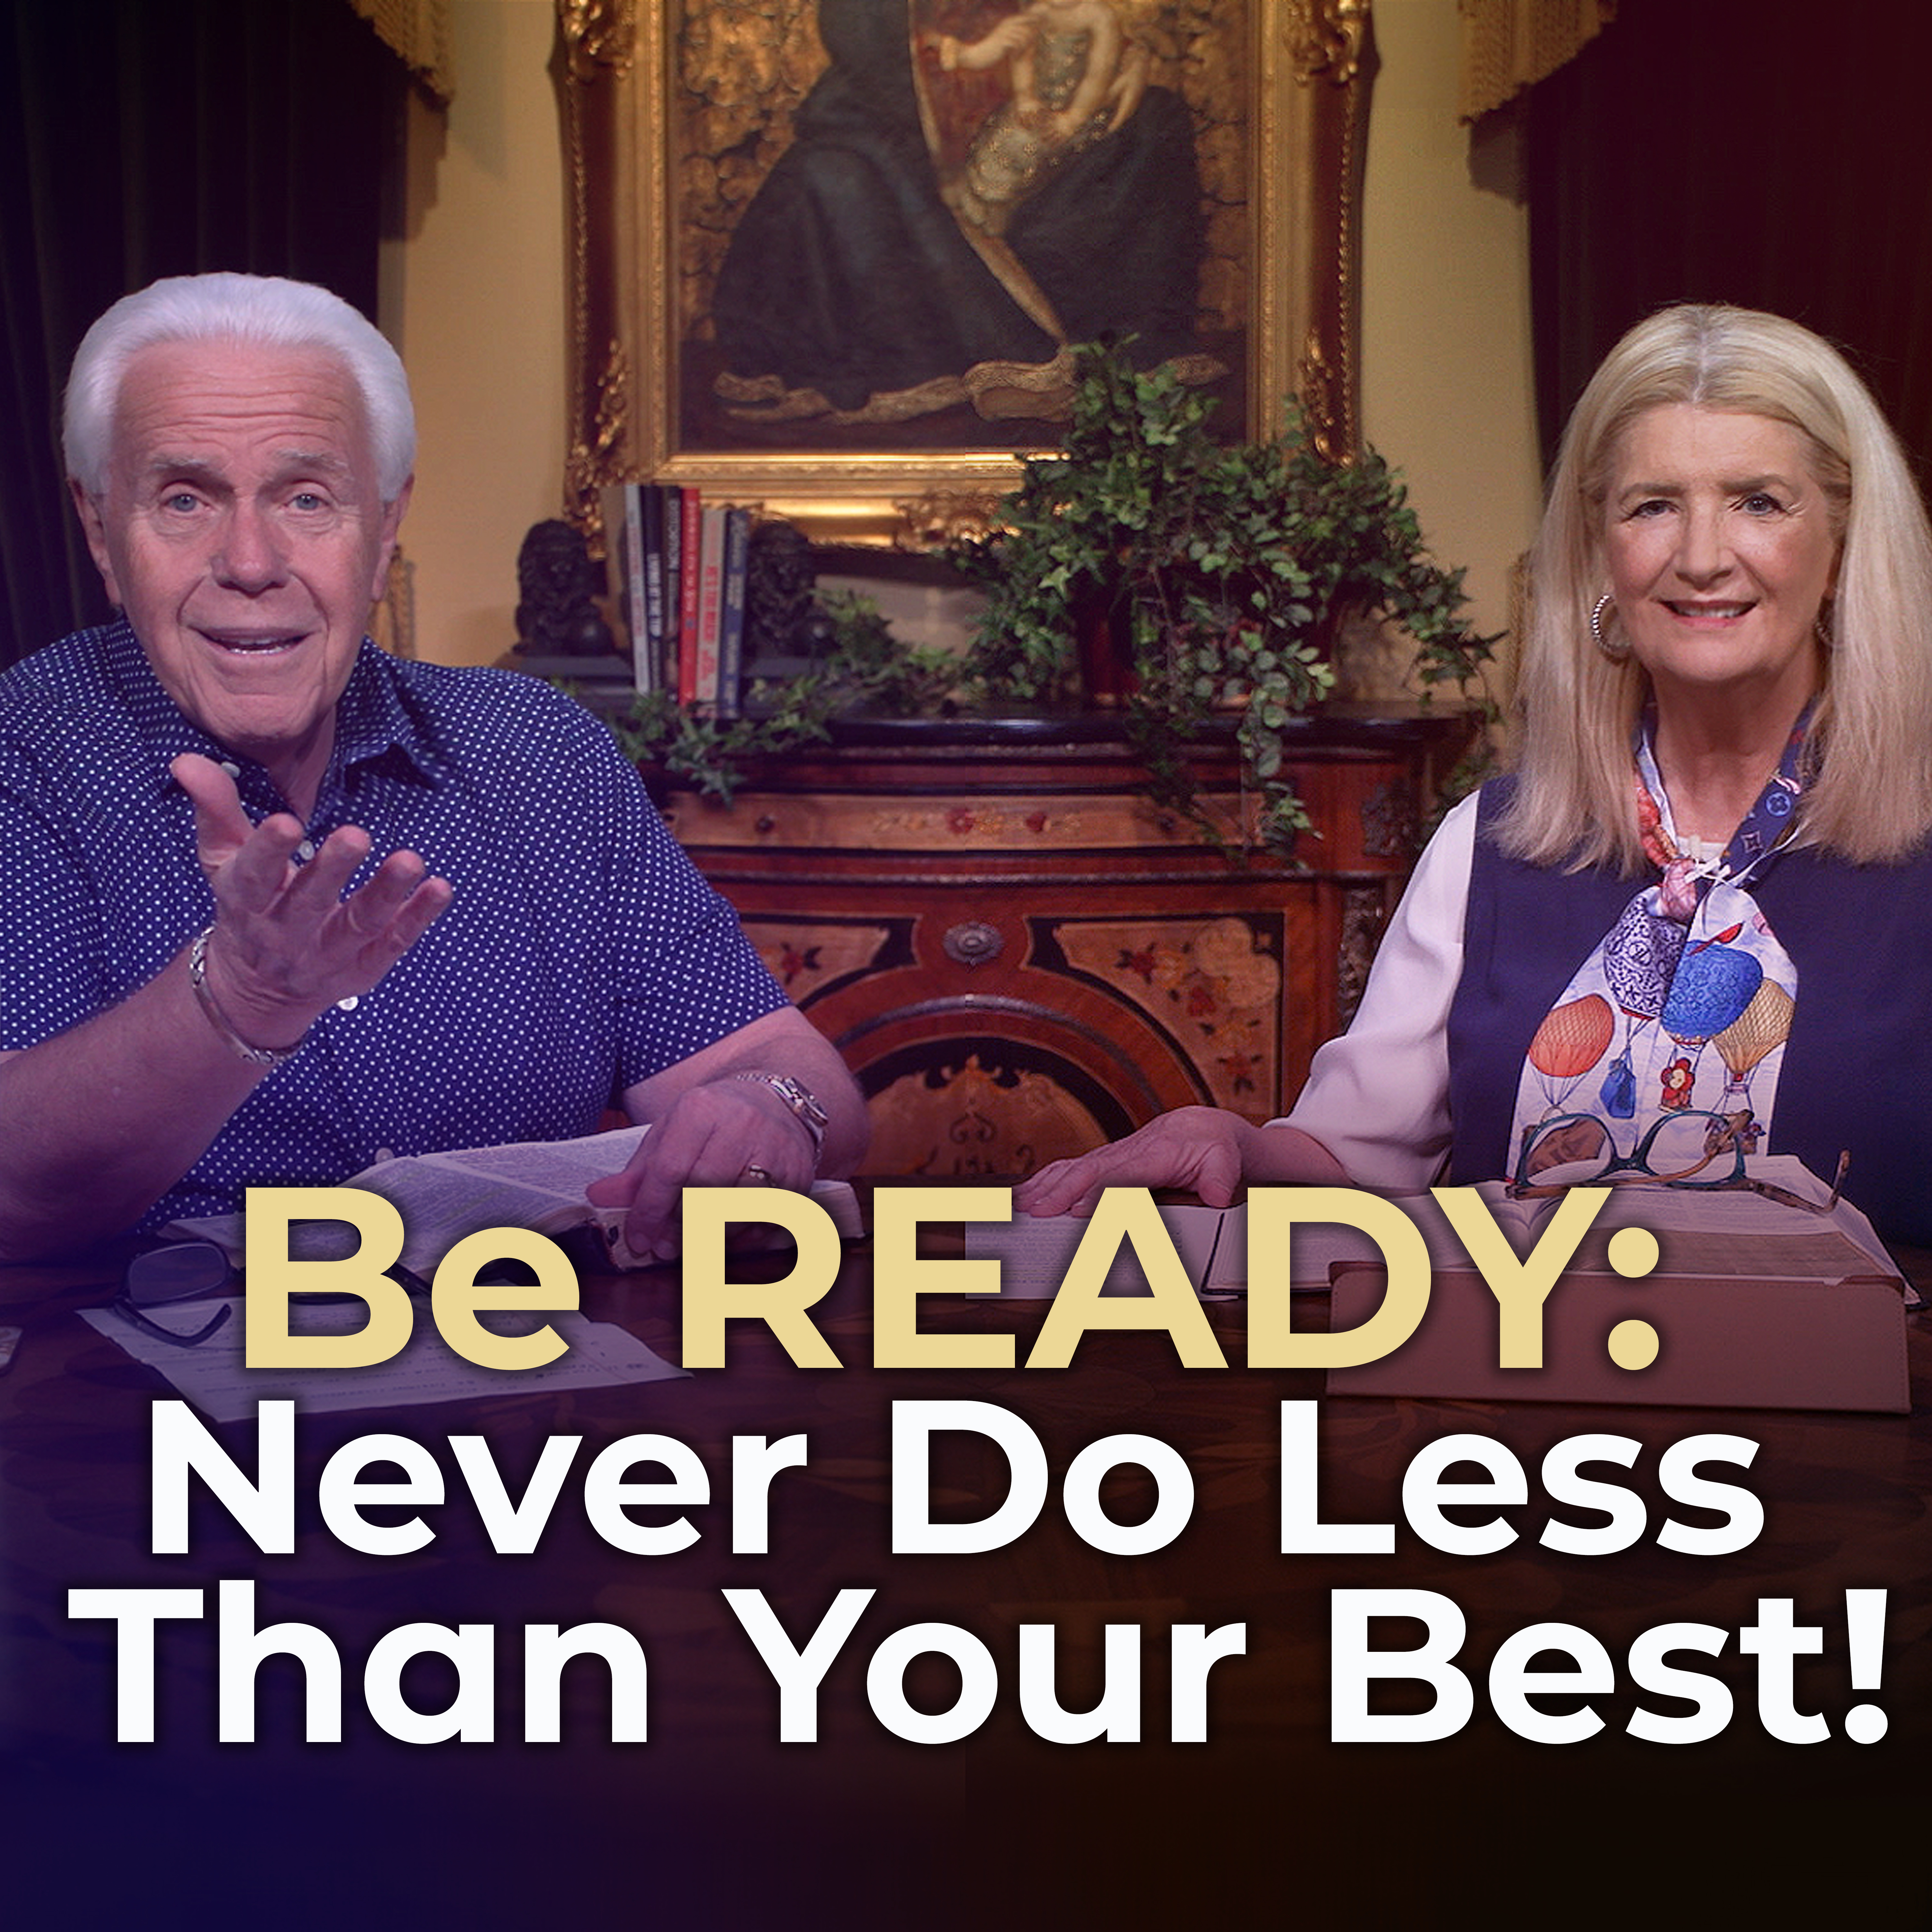 Be READY: Never Do Less Than Your Best!